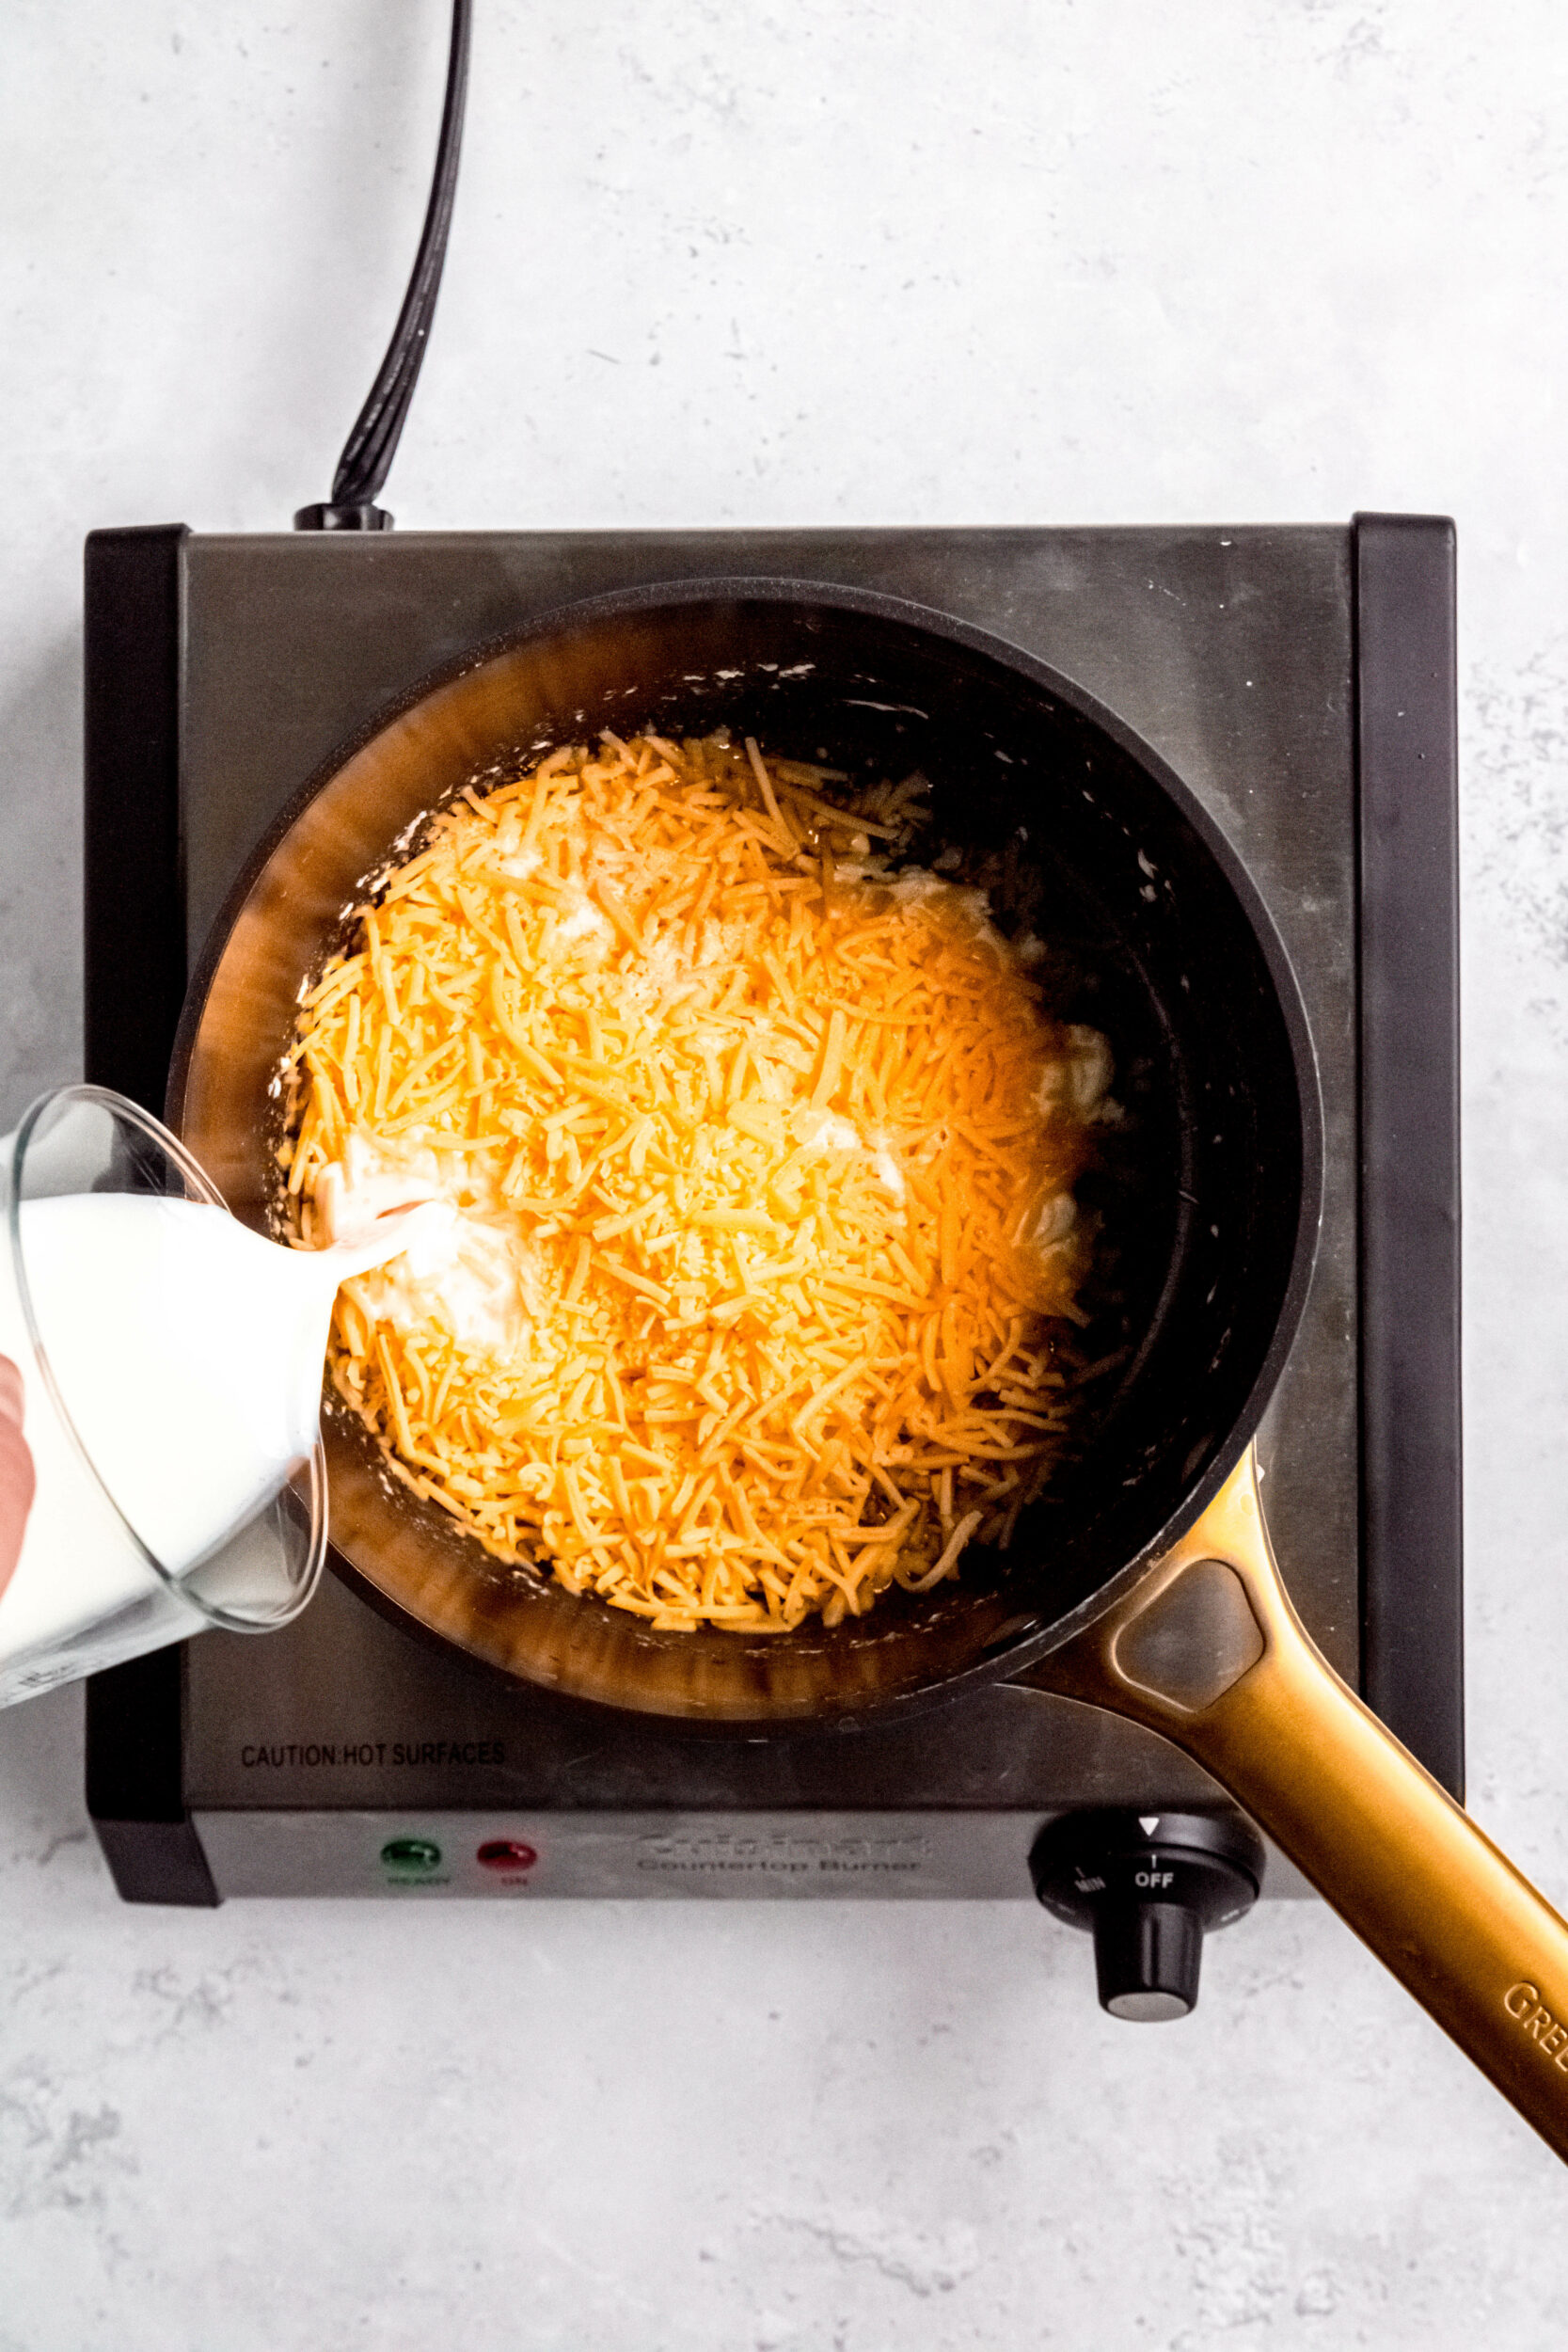 Pouring the milk into the sauce pan with the cheese.